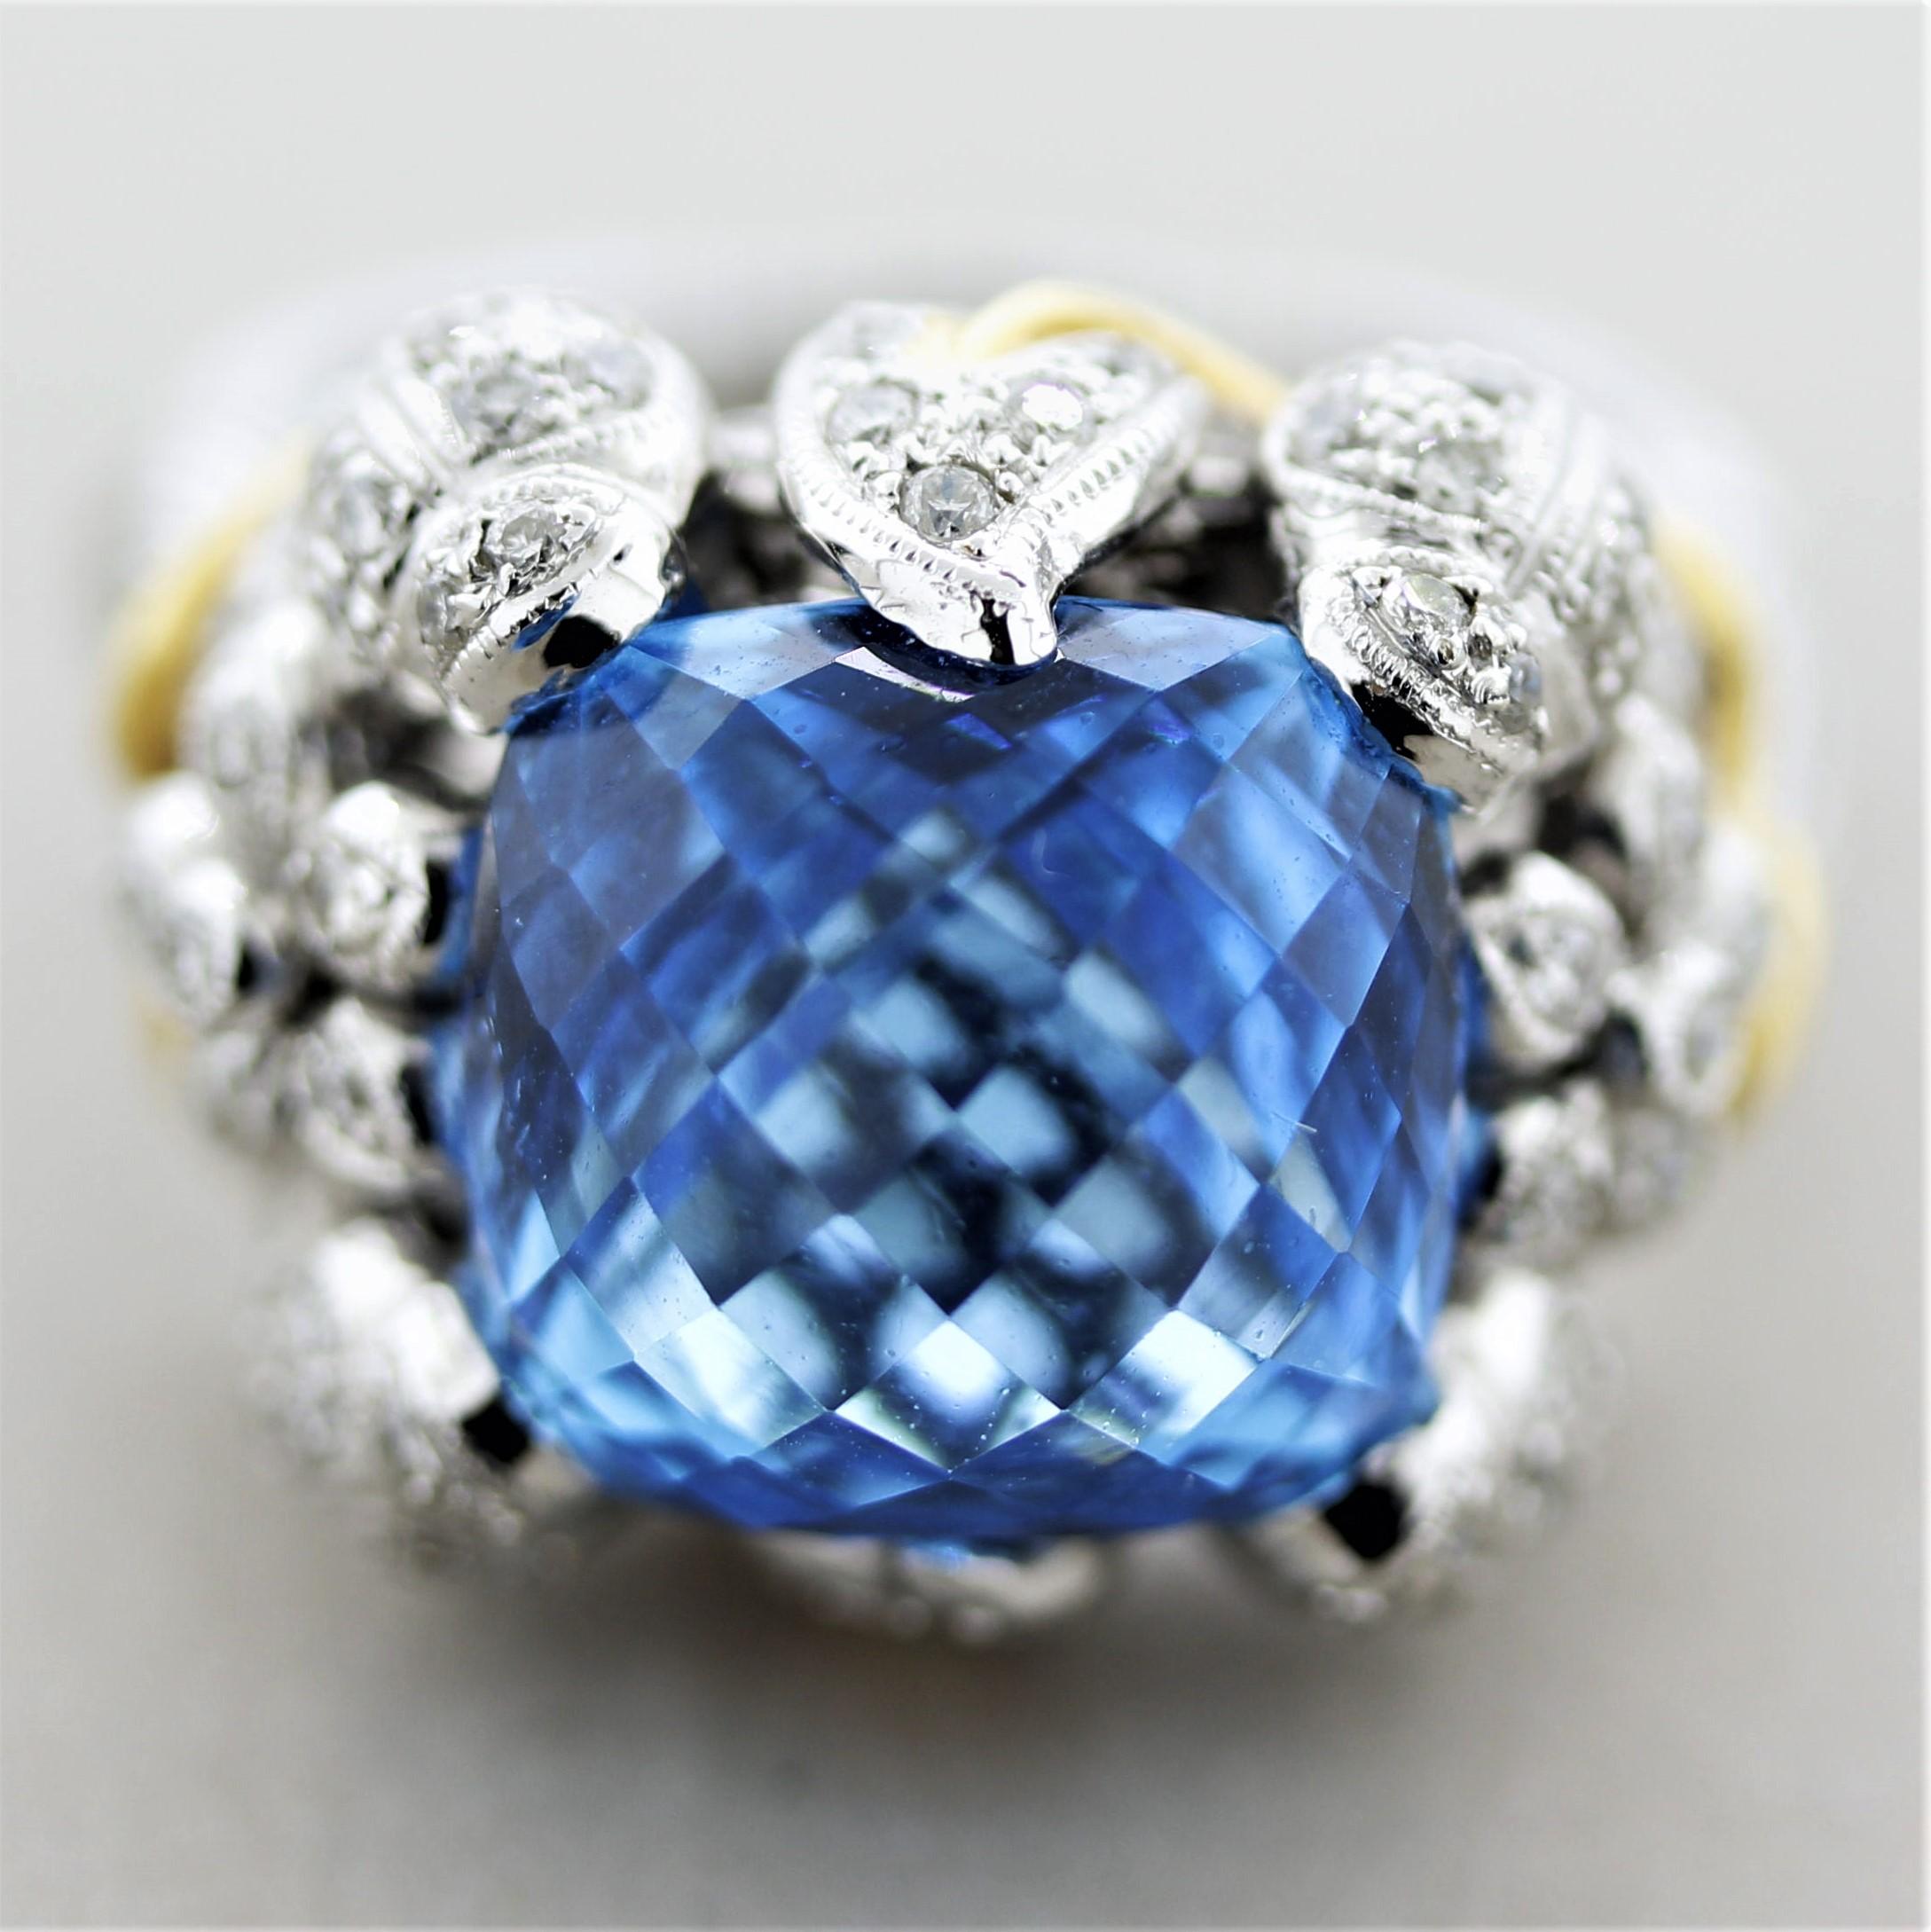 A sweet and stylish ring featuring a 8.60 carat topaz. It has a strong bright blue color and was cut into a unique dome faceted shape. It is accented by 0.74 carats of round brilliant-cut diamonds which are set into various leaves, flowers, and